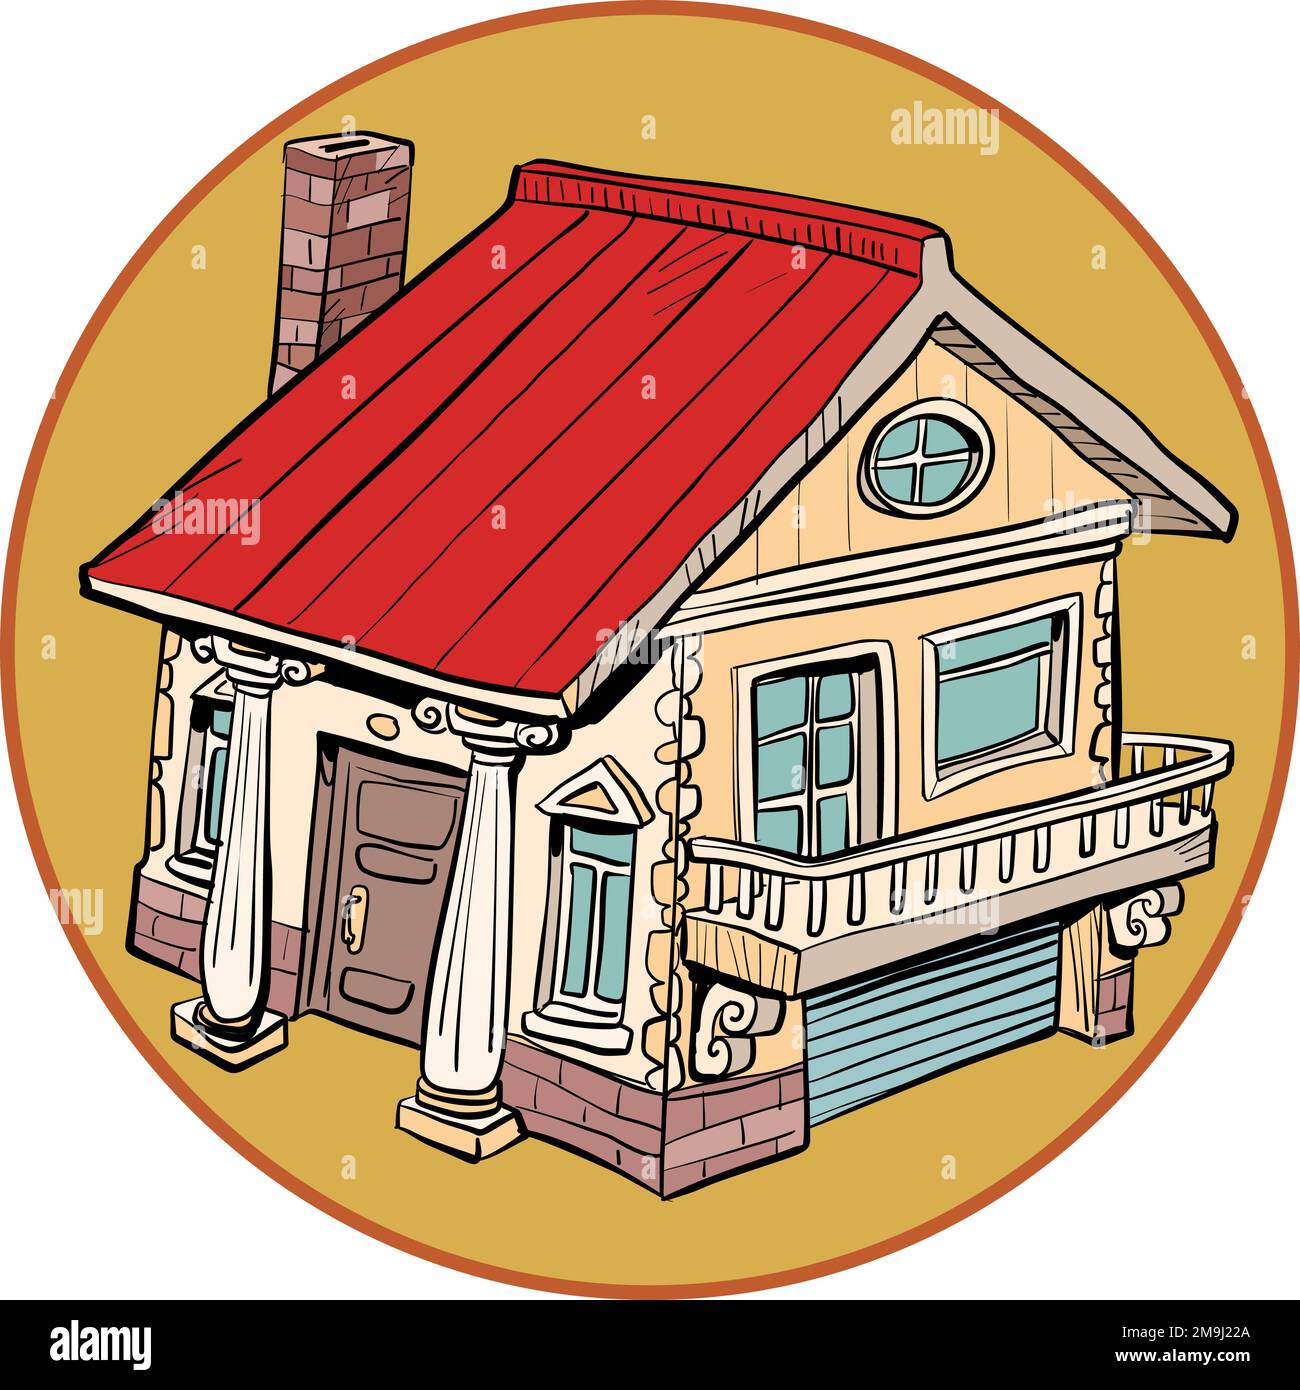 A cozy and beautiful house with a red roof, a garage, a chimney and several windows. Stock Vector